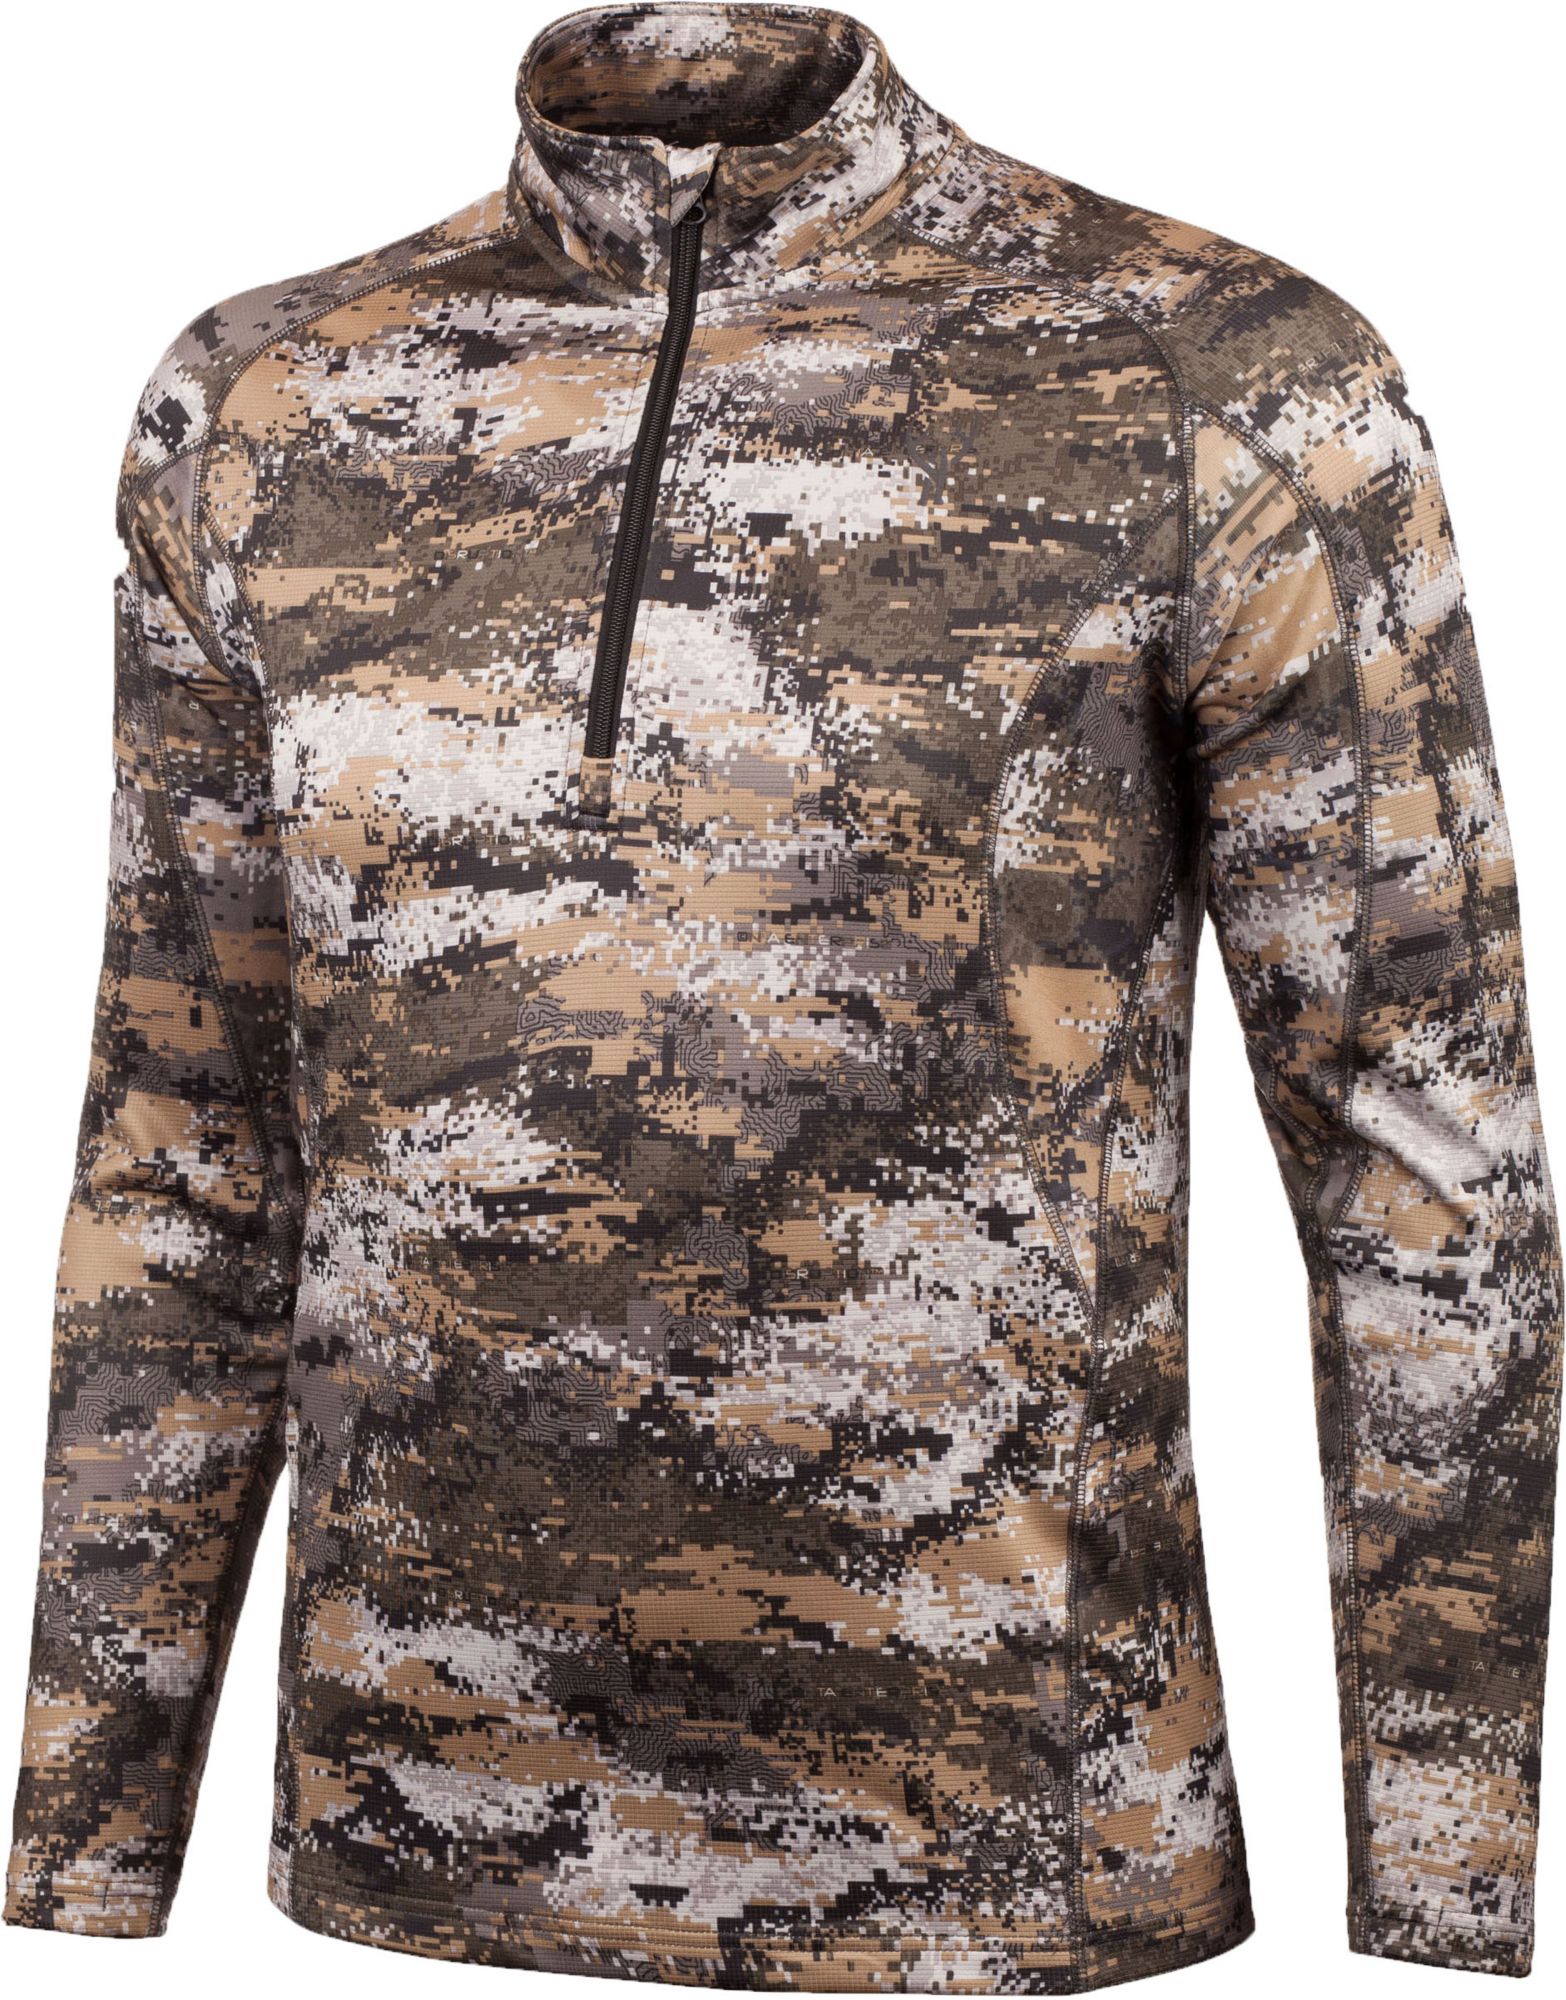 Hunting Vests | DICK'S Sporting Goods